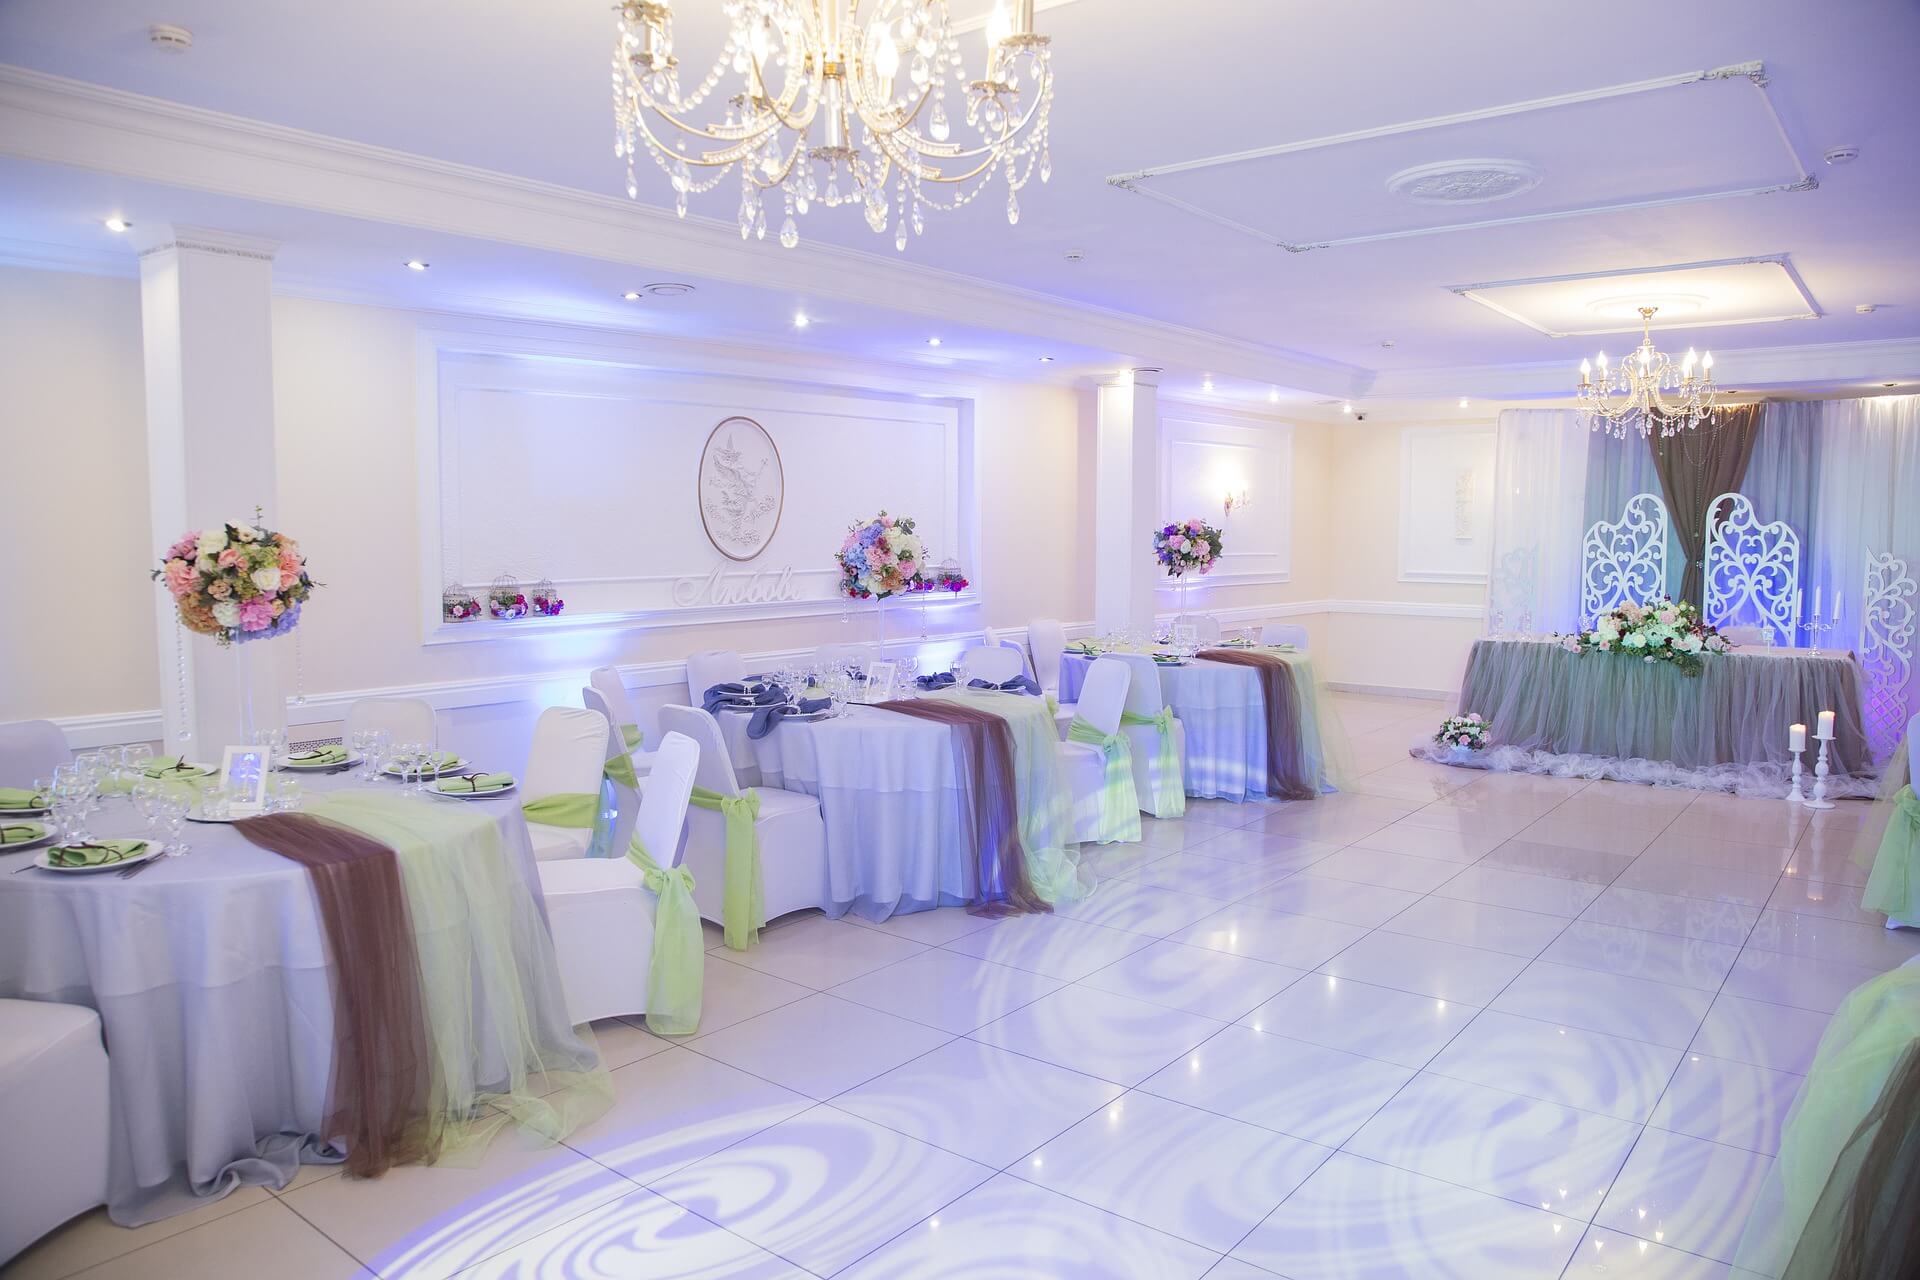 How to Start a Banquet Hall Business